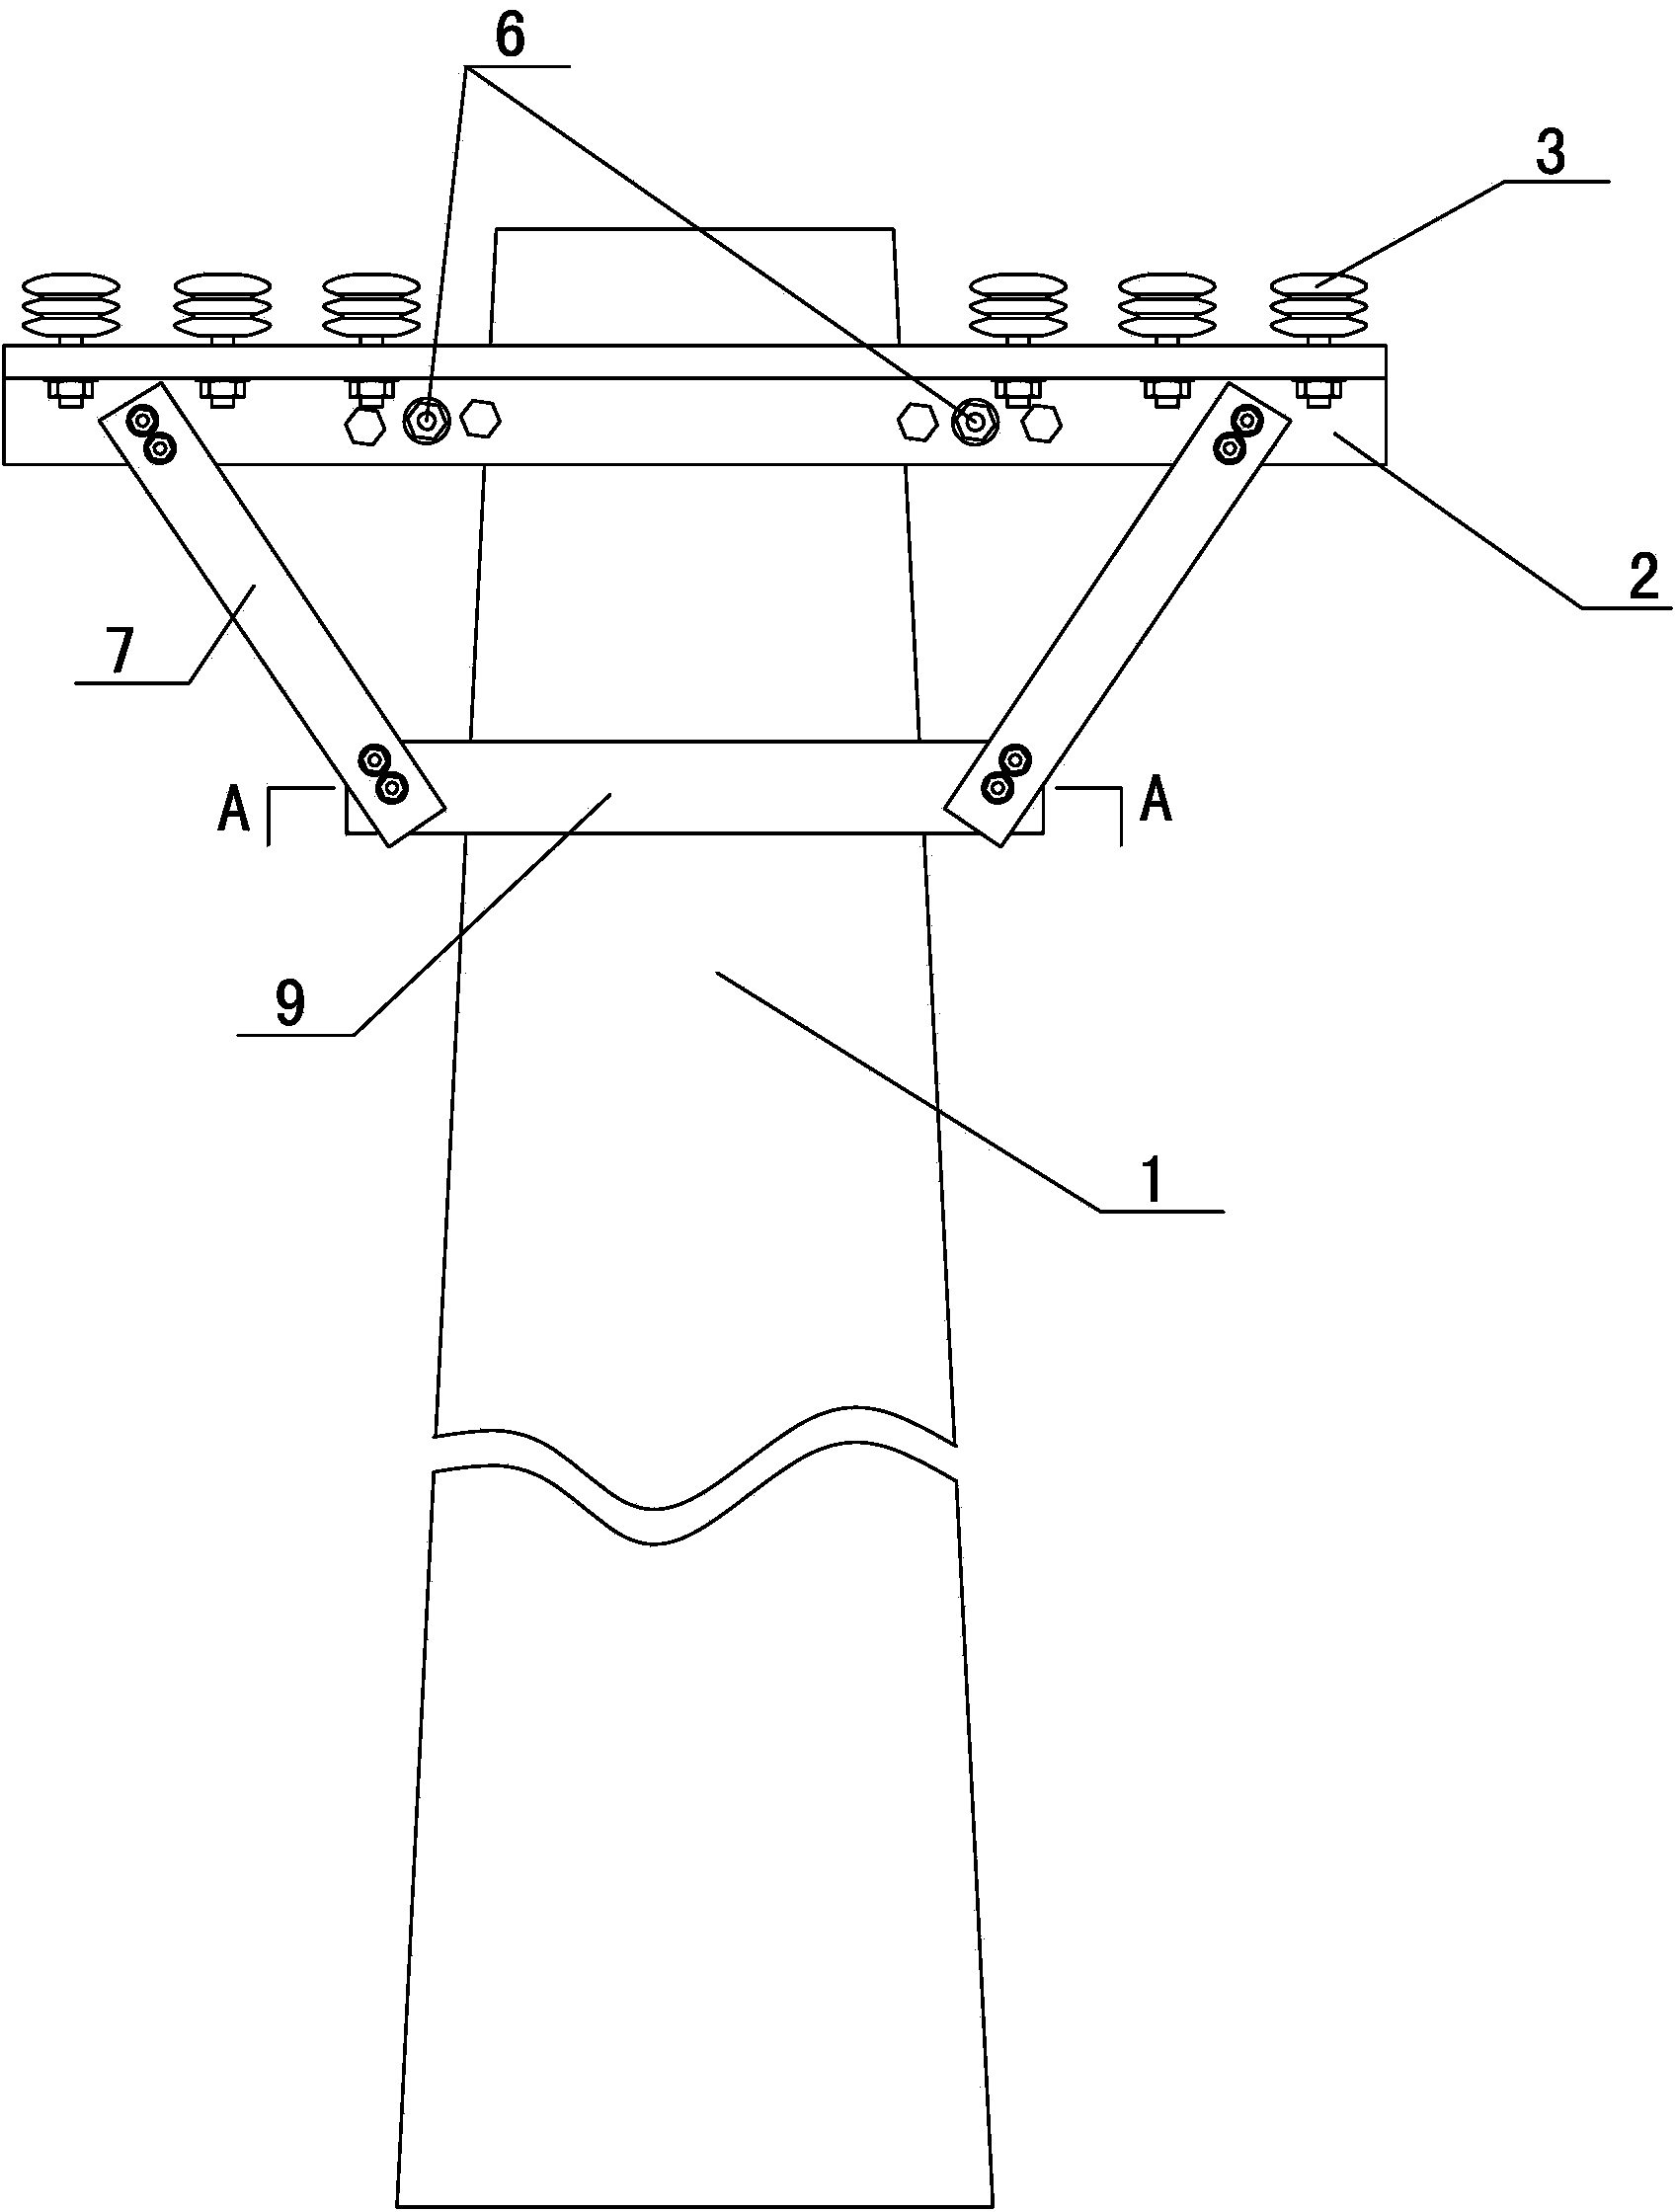 High-voltage line support used on telegraph pole